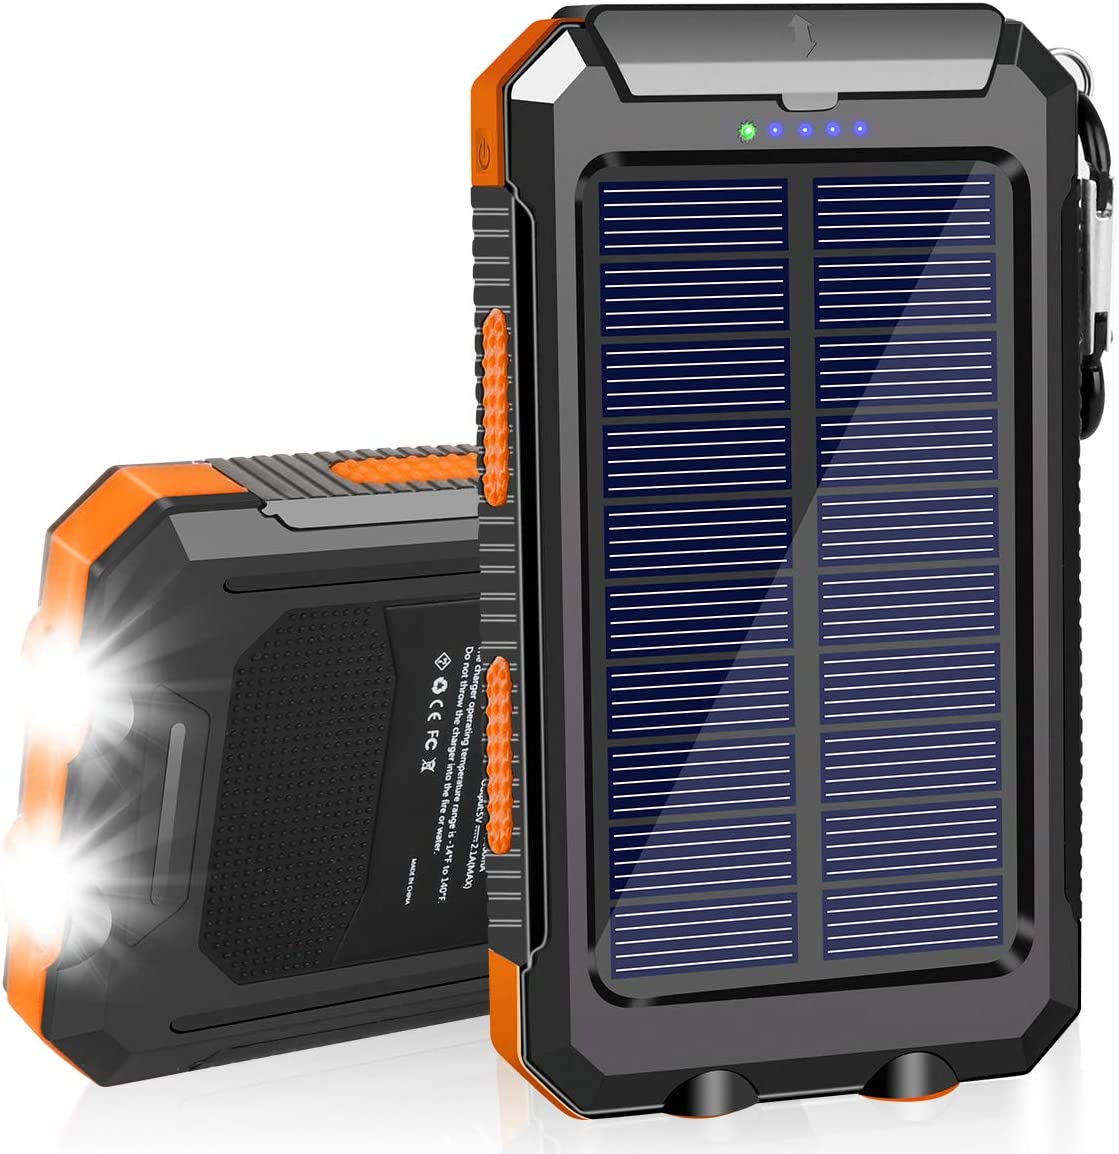 suscell-solar-charger-20000mah-solar-power-bank-waterproof-portable-charger -with-dual-5v-usb-port-led-flashlight-compatible-with-all-smartphone-external- battery-pack-perfect-for-outdoor_1.jpg - AllEars.Net